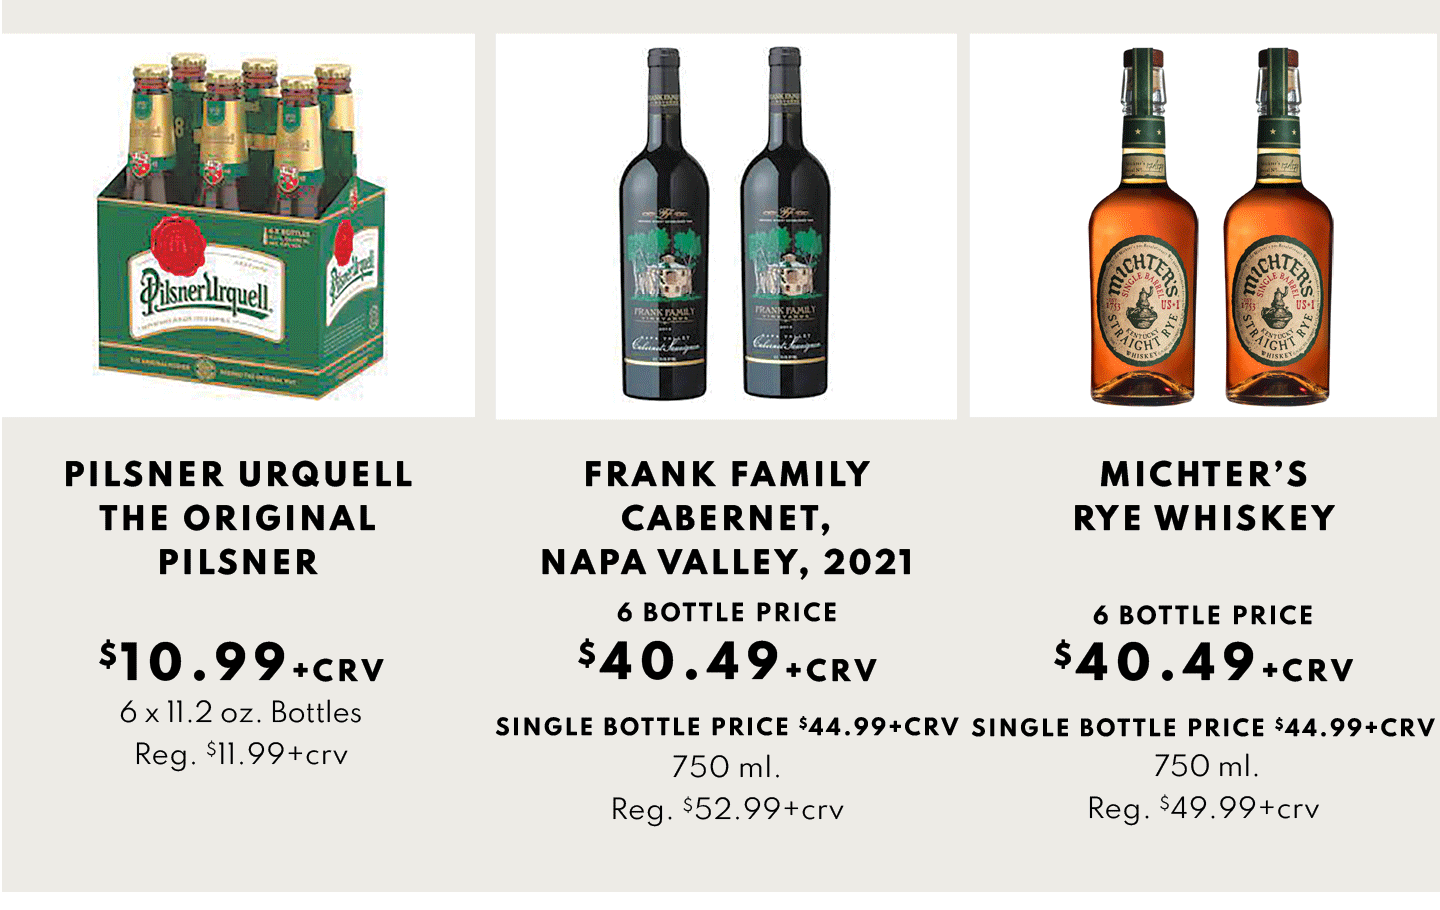 Pilsner Urquell The Original $10.99, Frank Family Cabernet Napa Valley $40.49 and Mitchter's Rye Whiskey $40.49